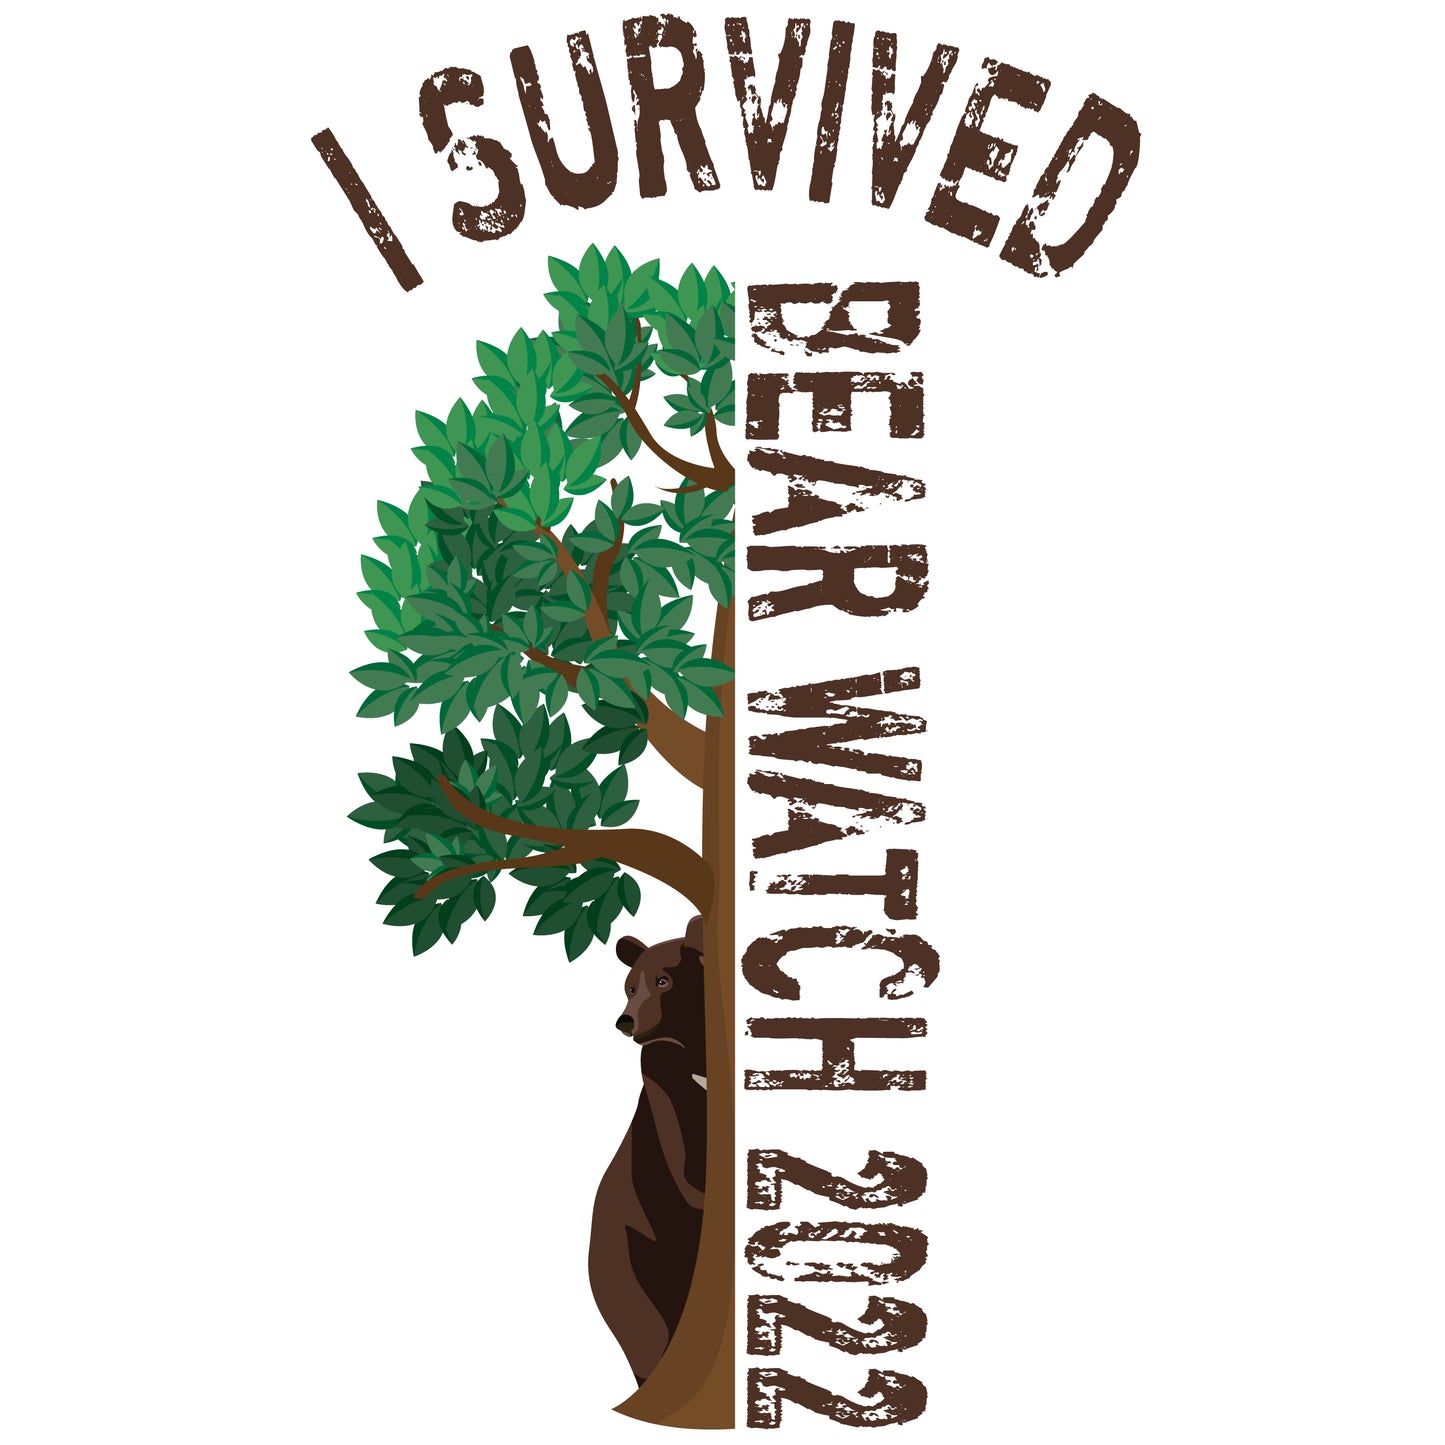 I SURVIVED BEAR WATCH 2022 - A